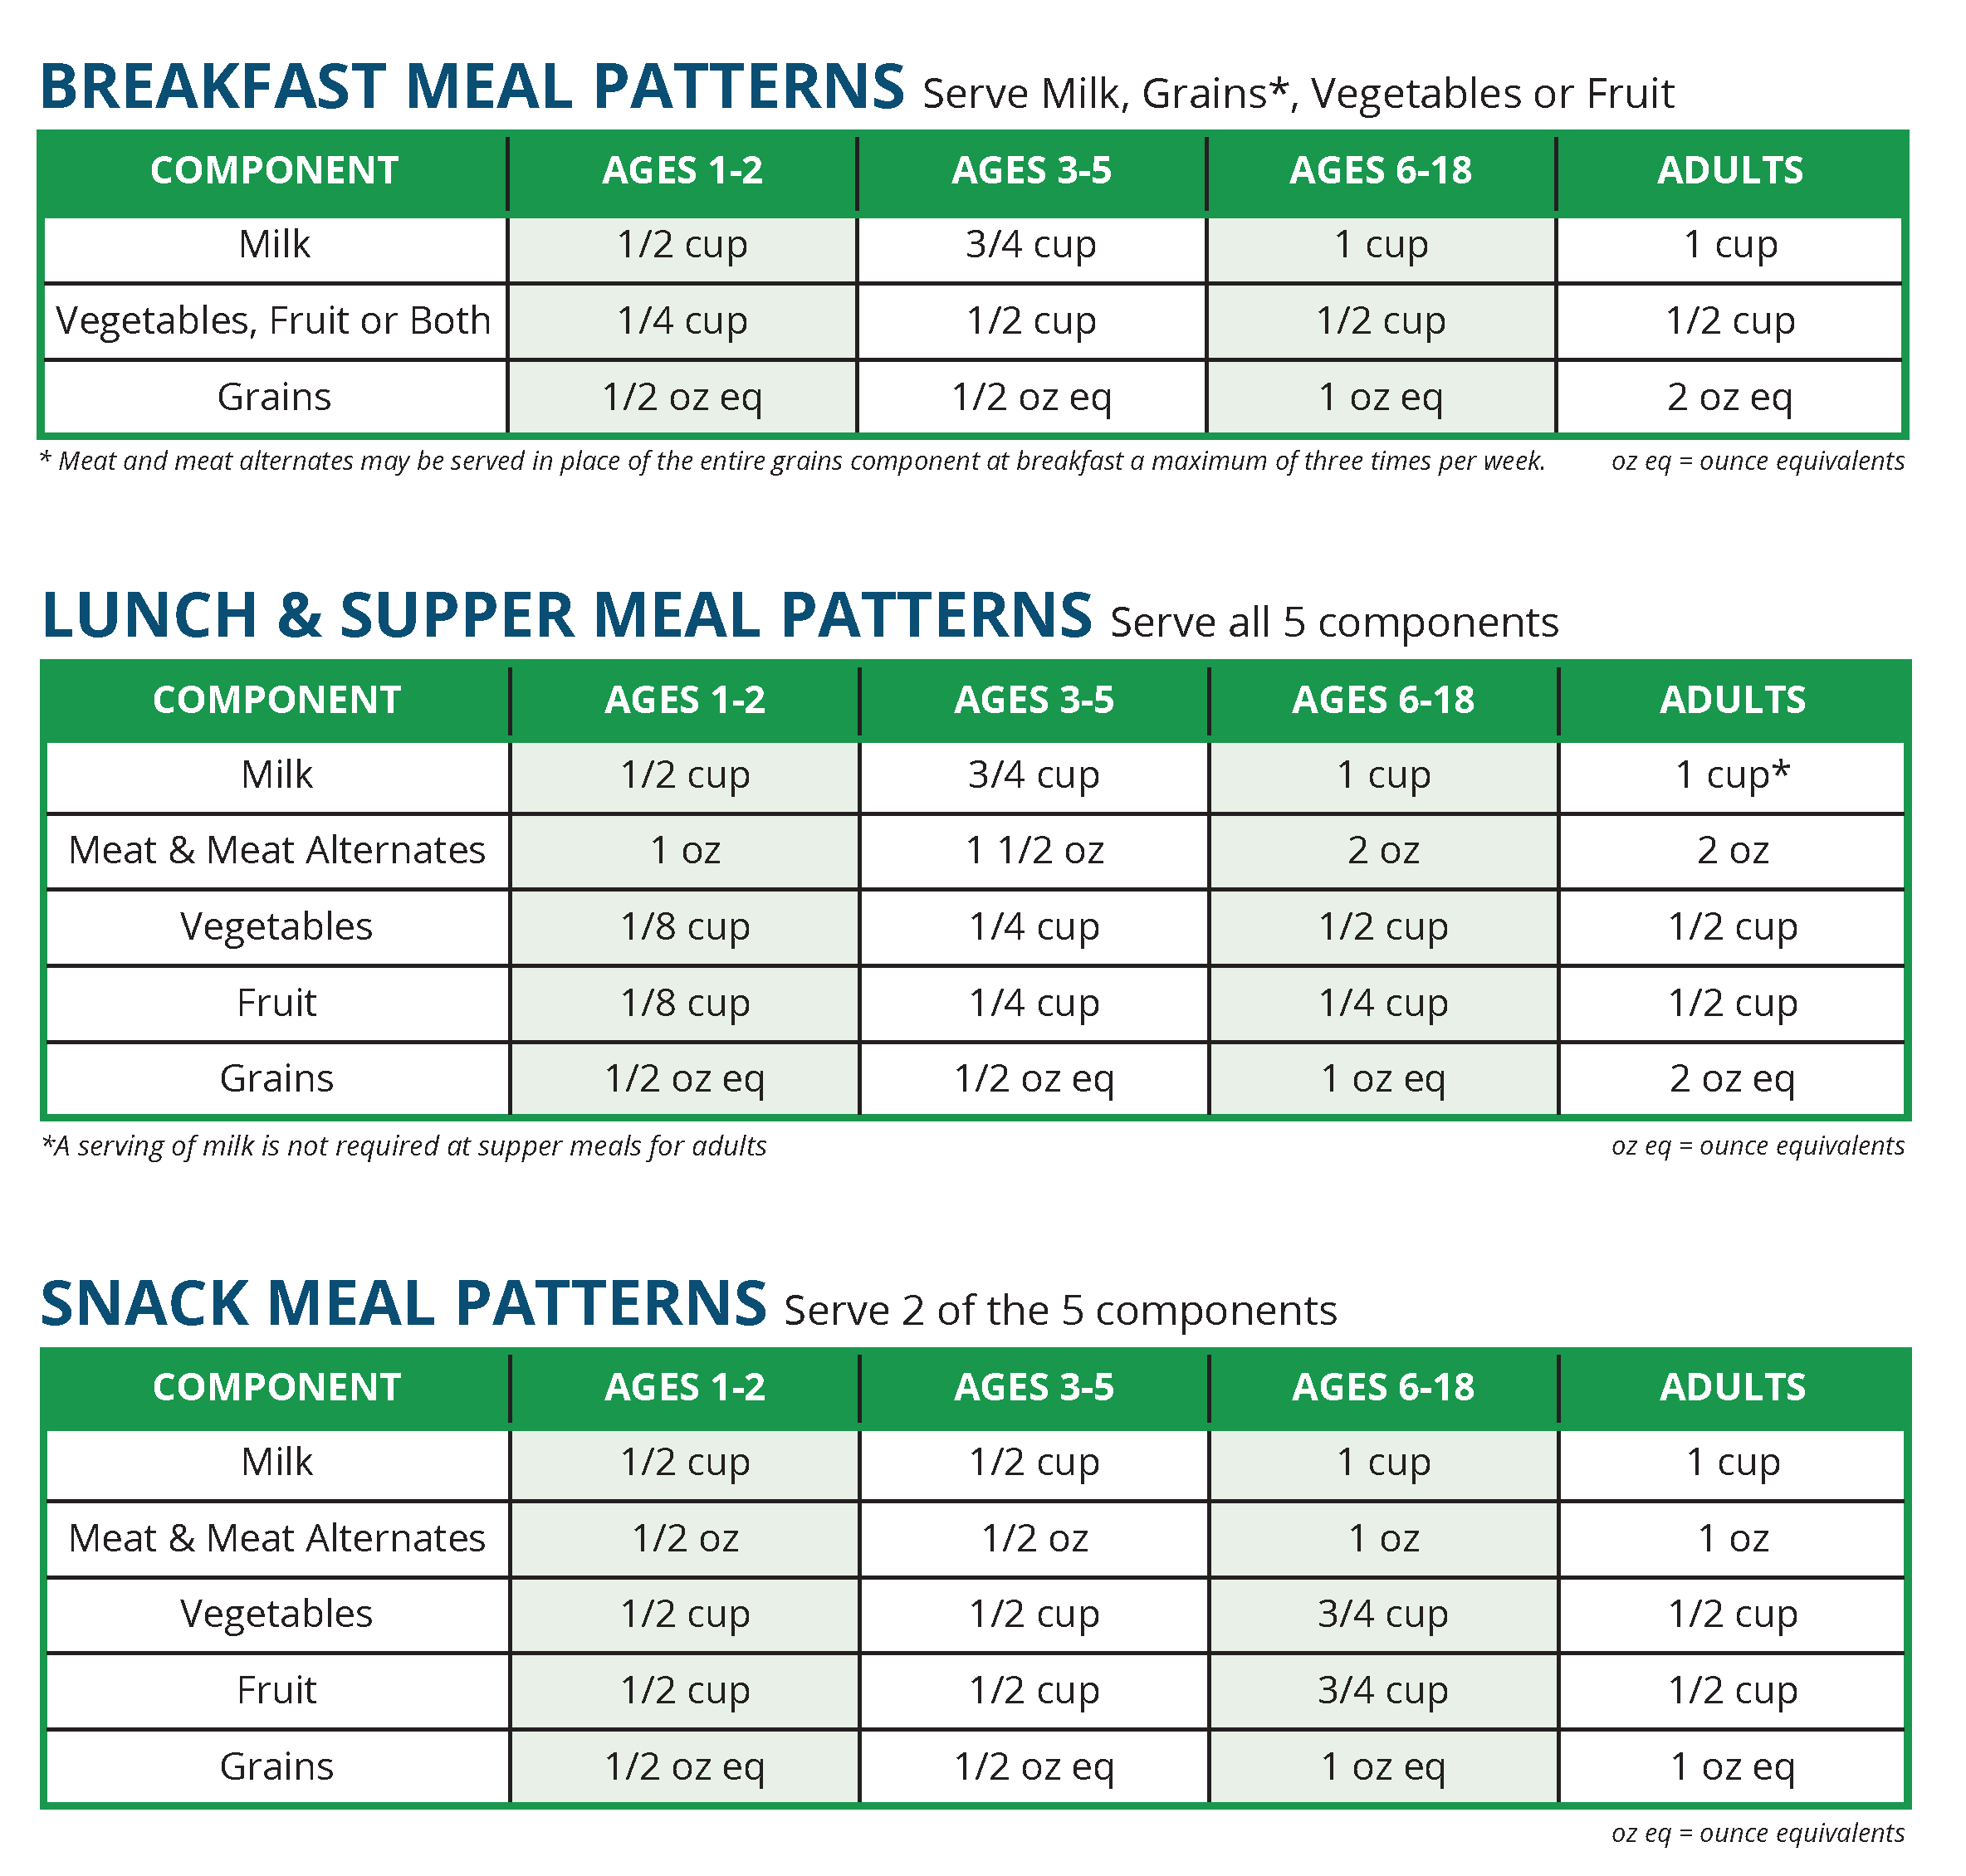 CACFP Child/Adult Meal Patterns